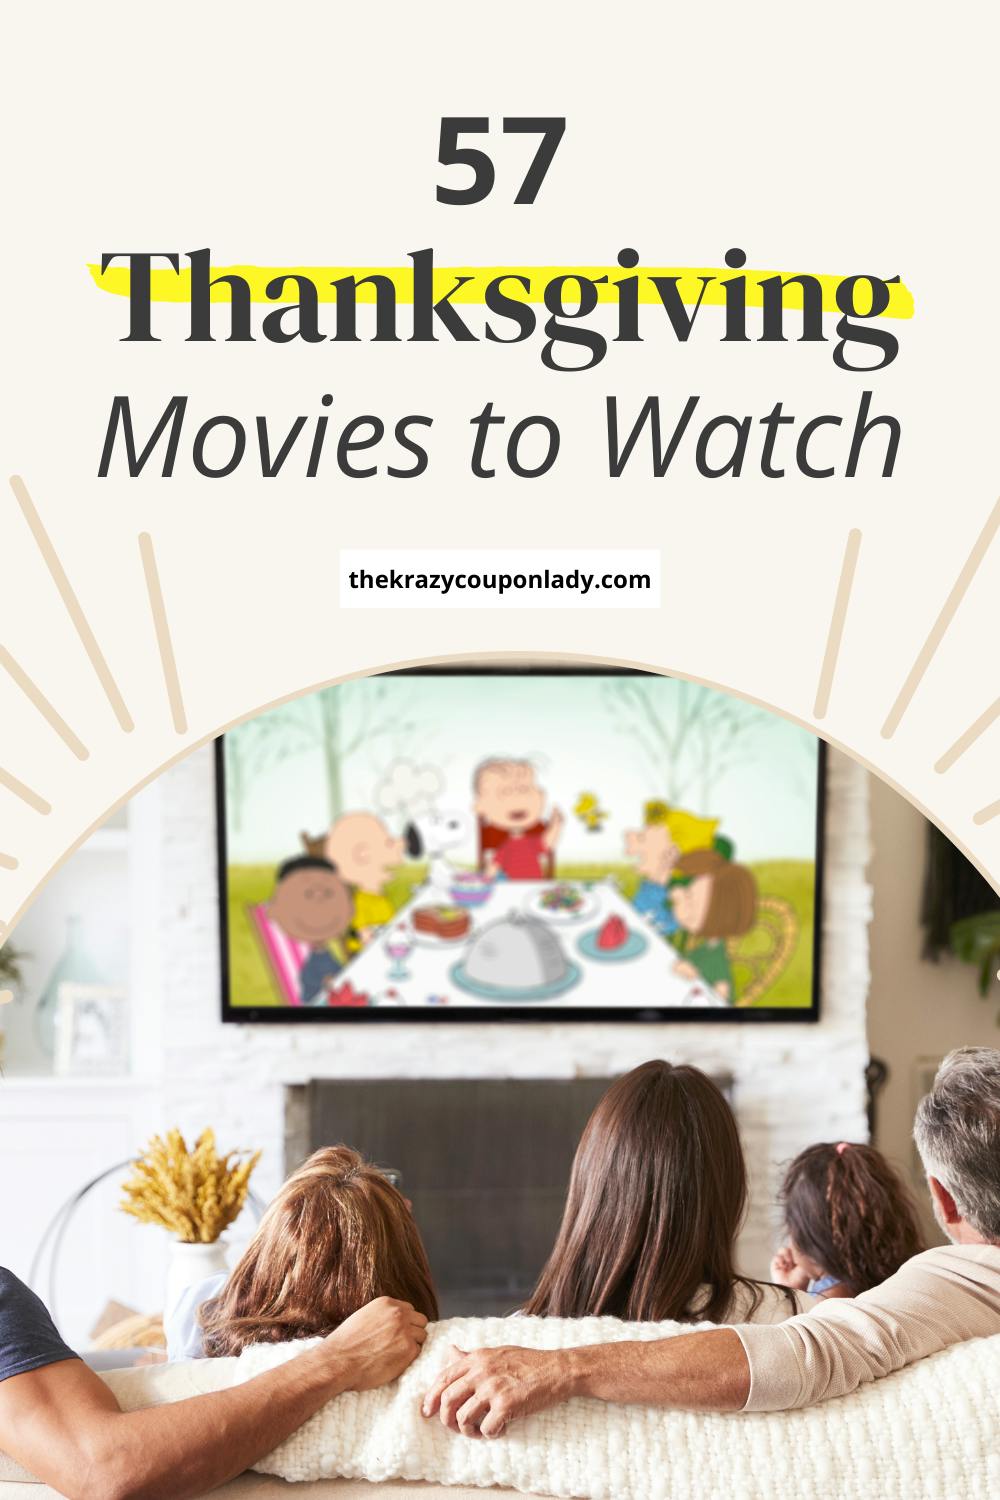 60 Thanksgiving Movies to Watch While You Digest Dinner